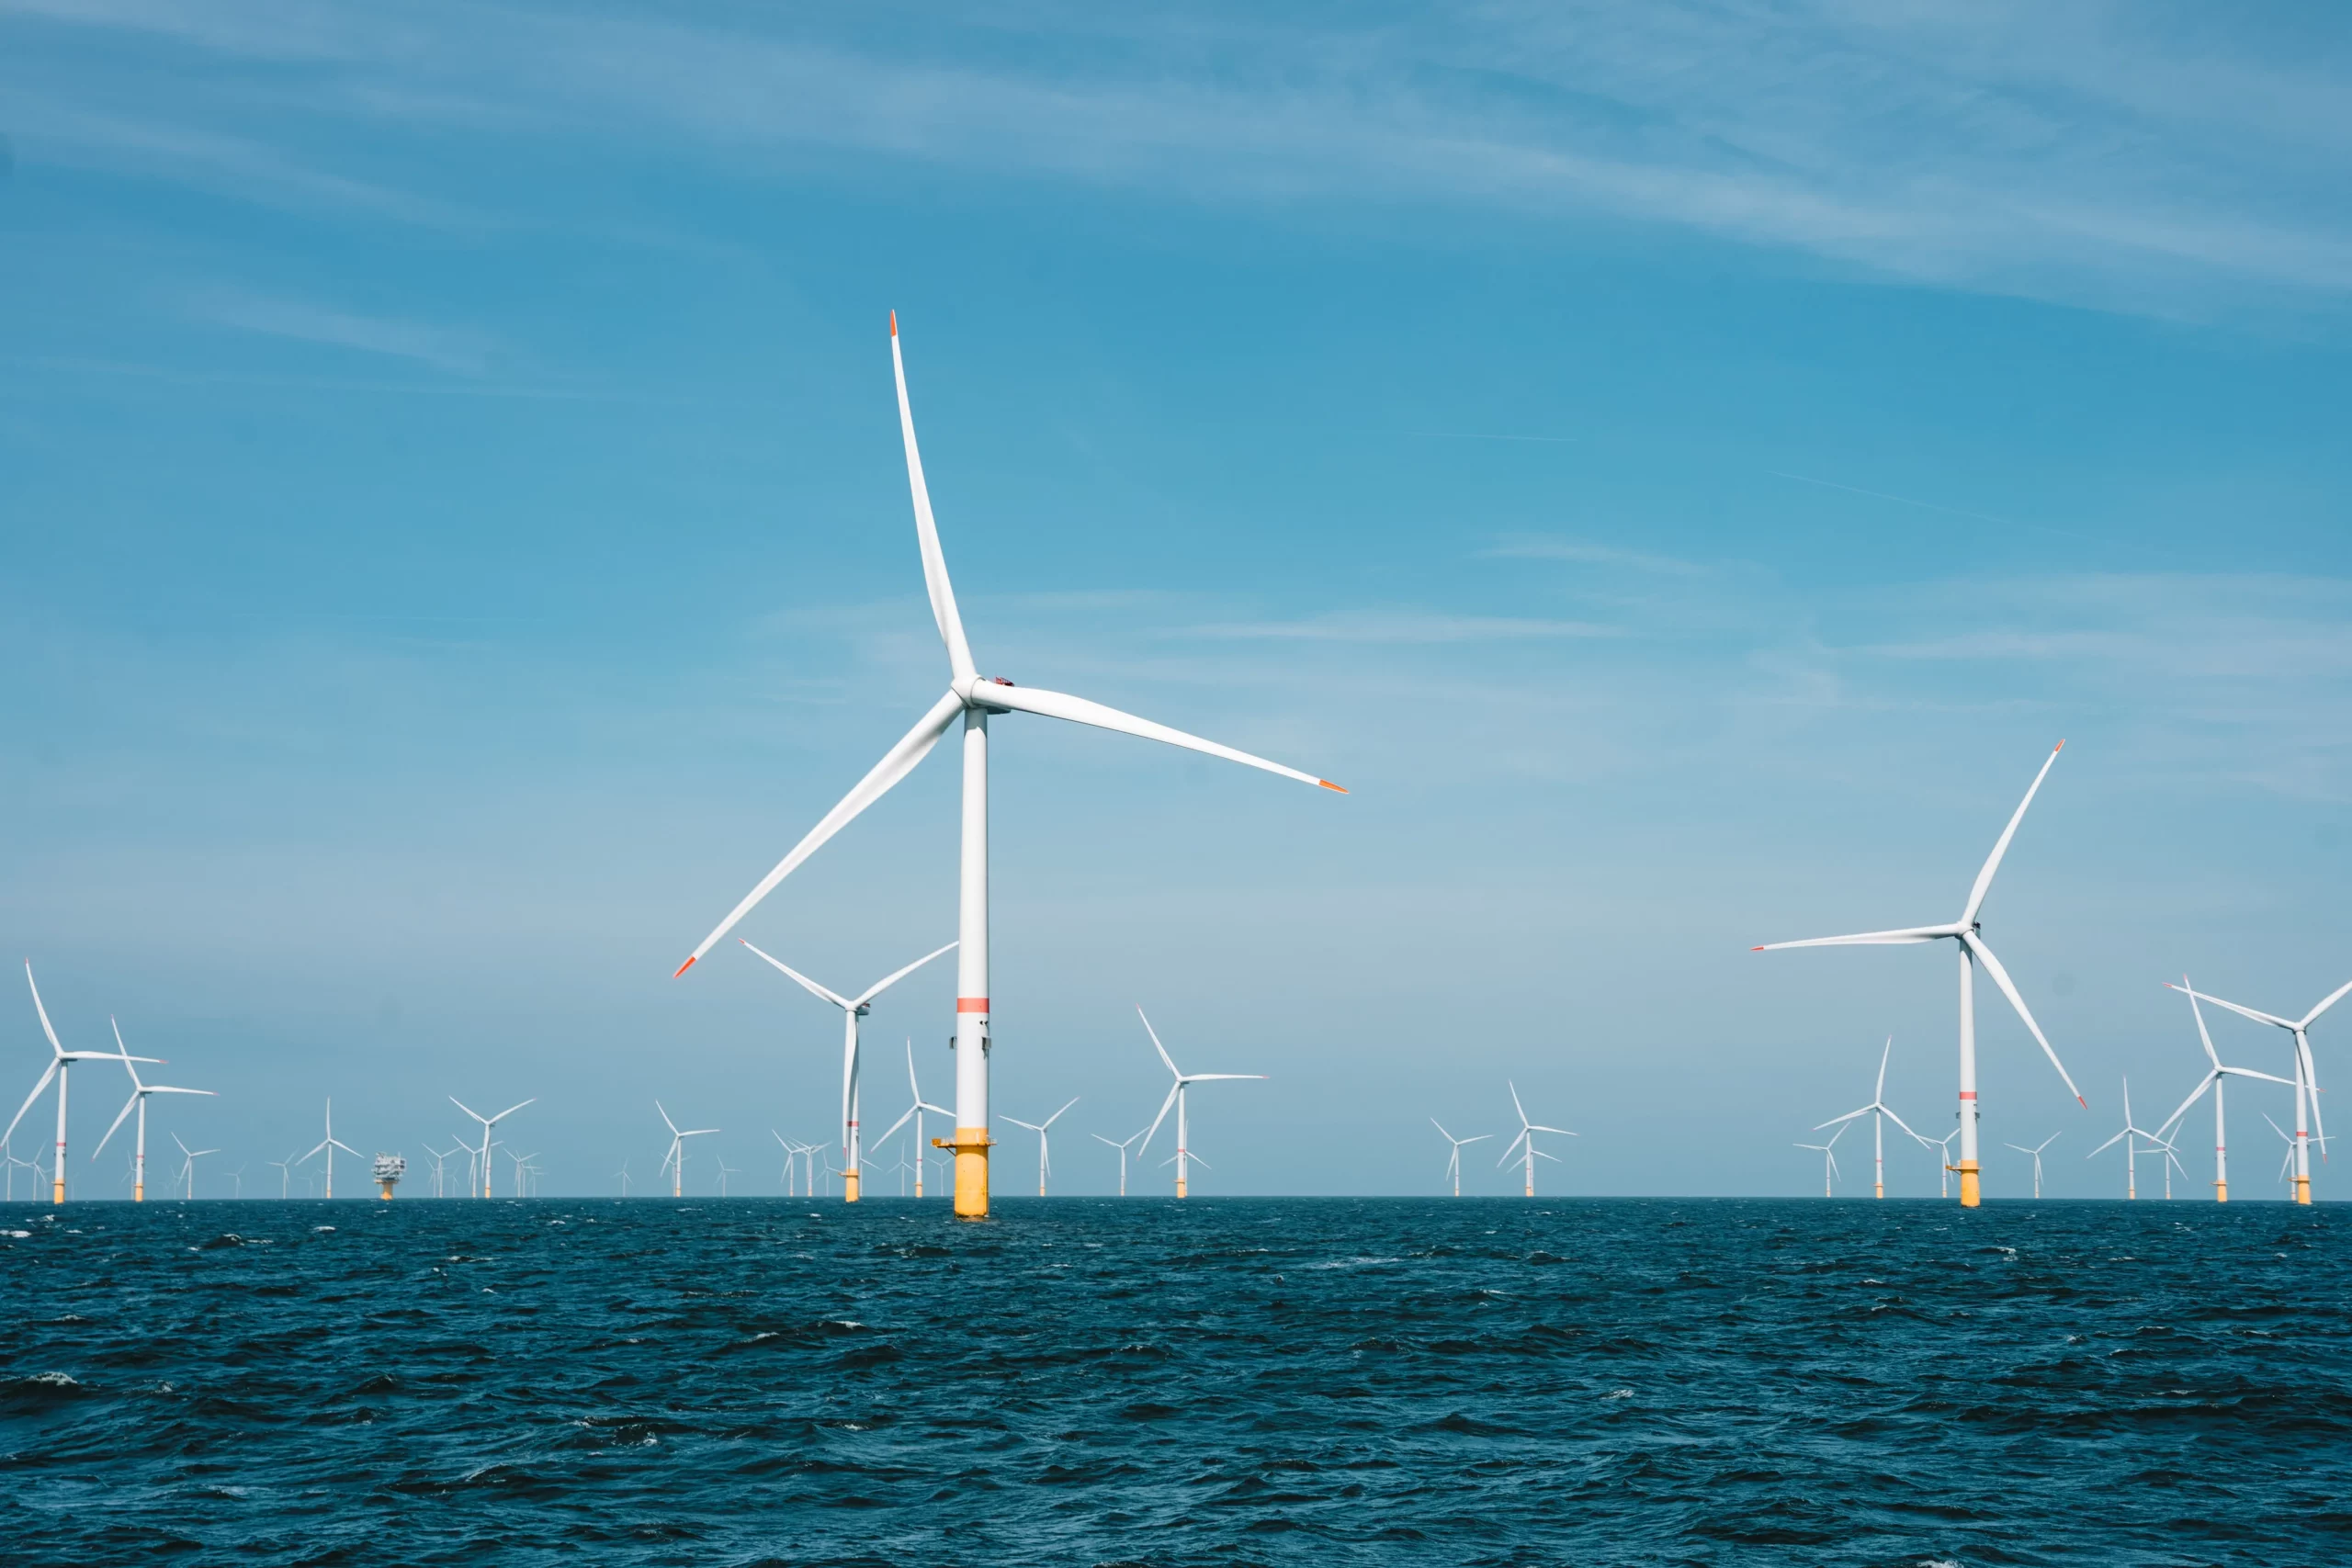 offshore wind farm with turbines and OHVS